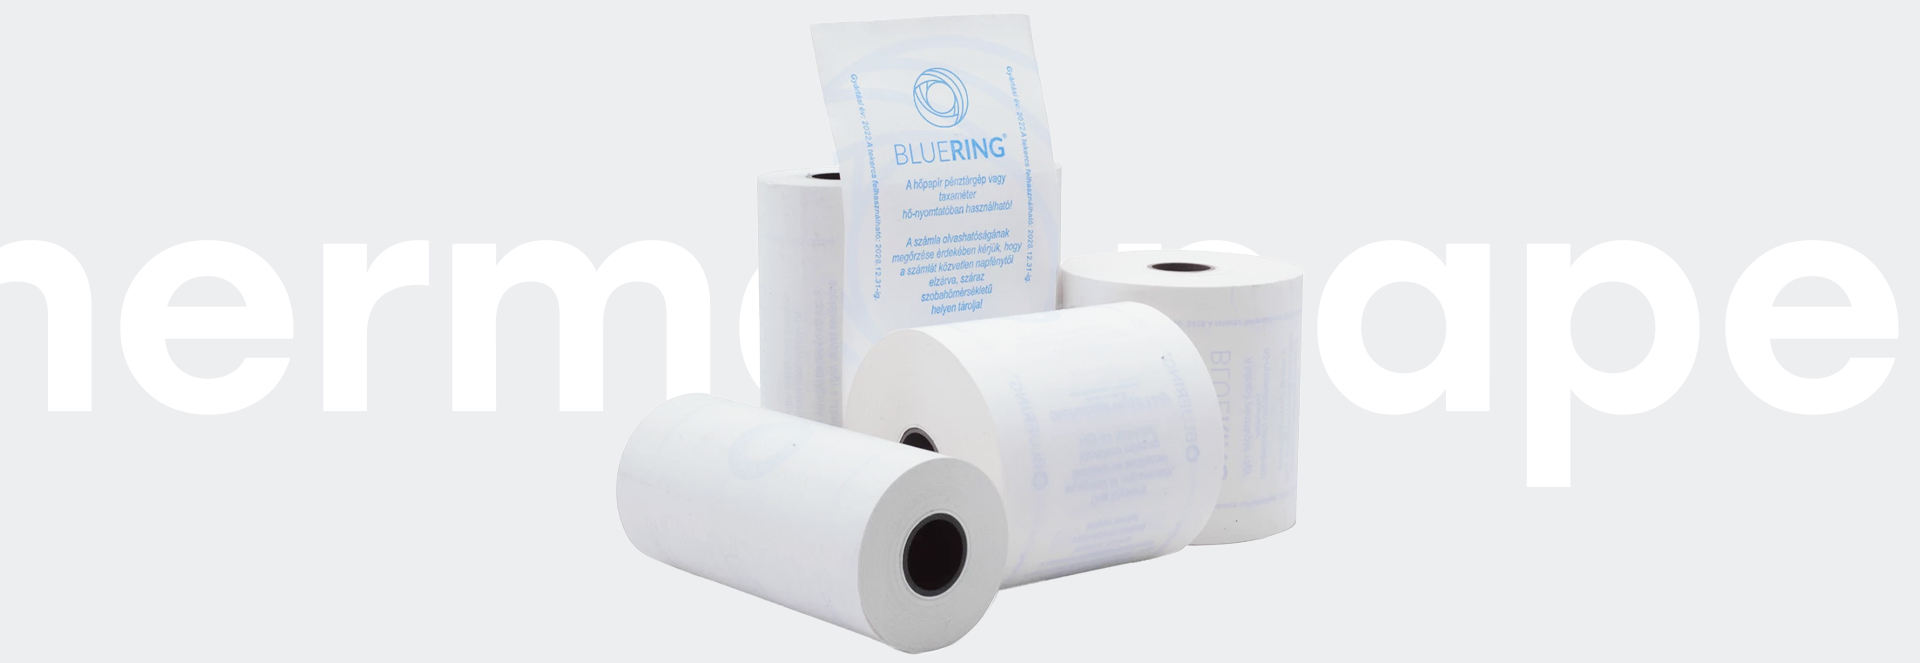 Buy only good quality thermal paper!